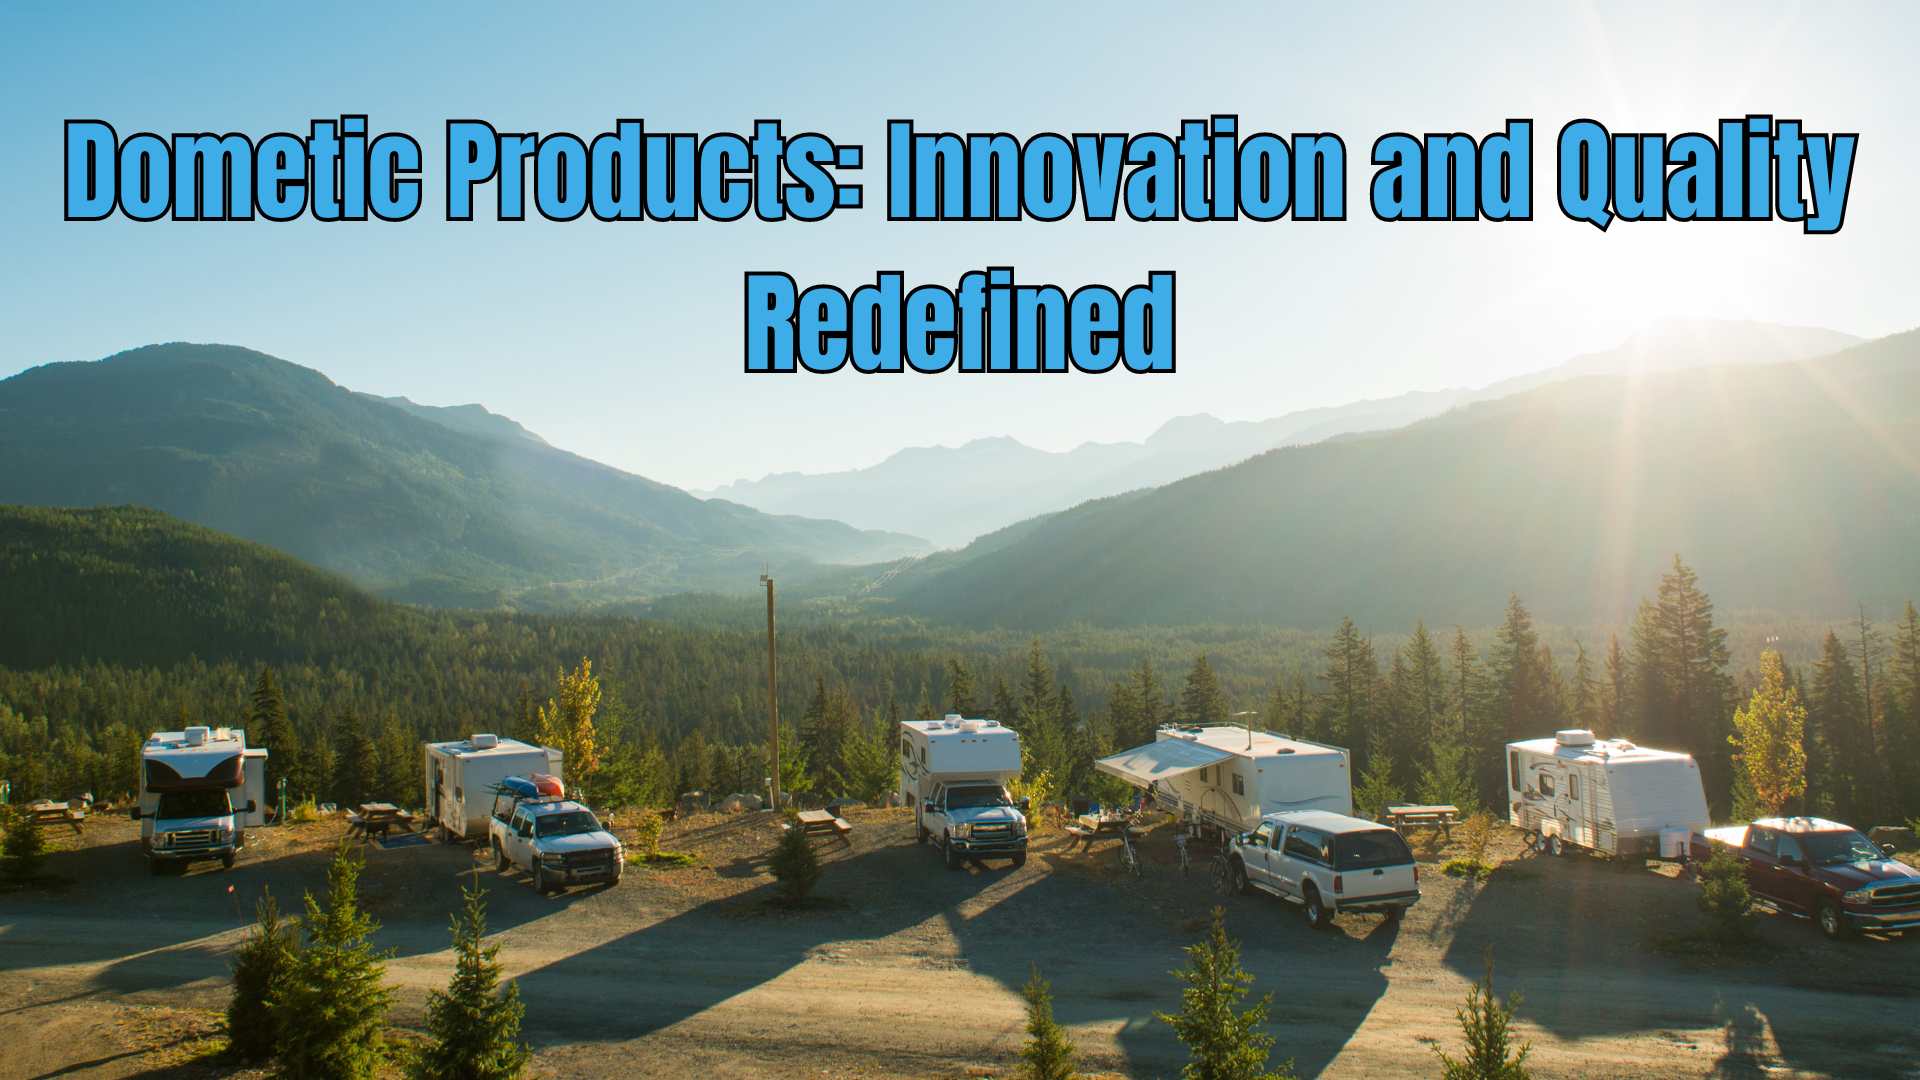 Dometic Products: Innovation and Quality Redefined